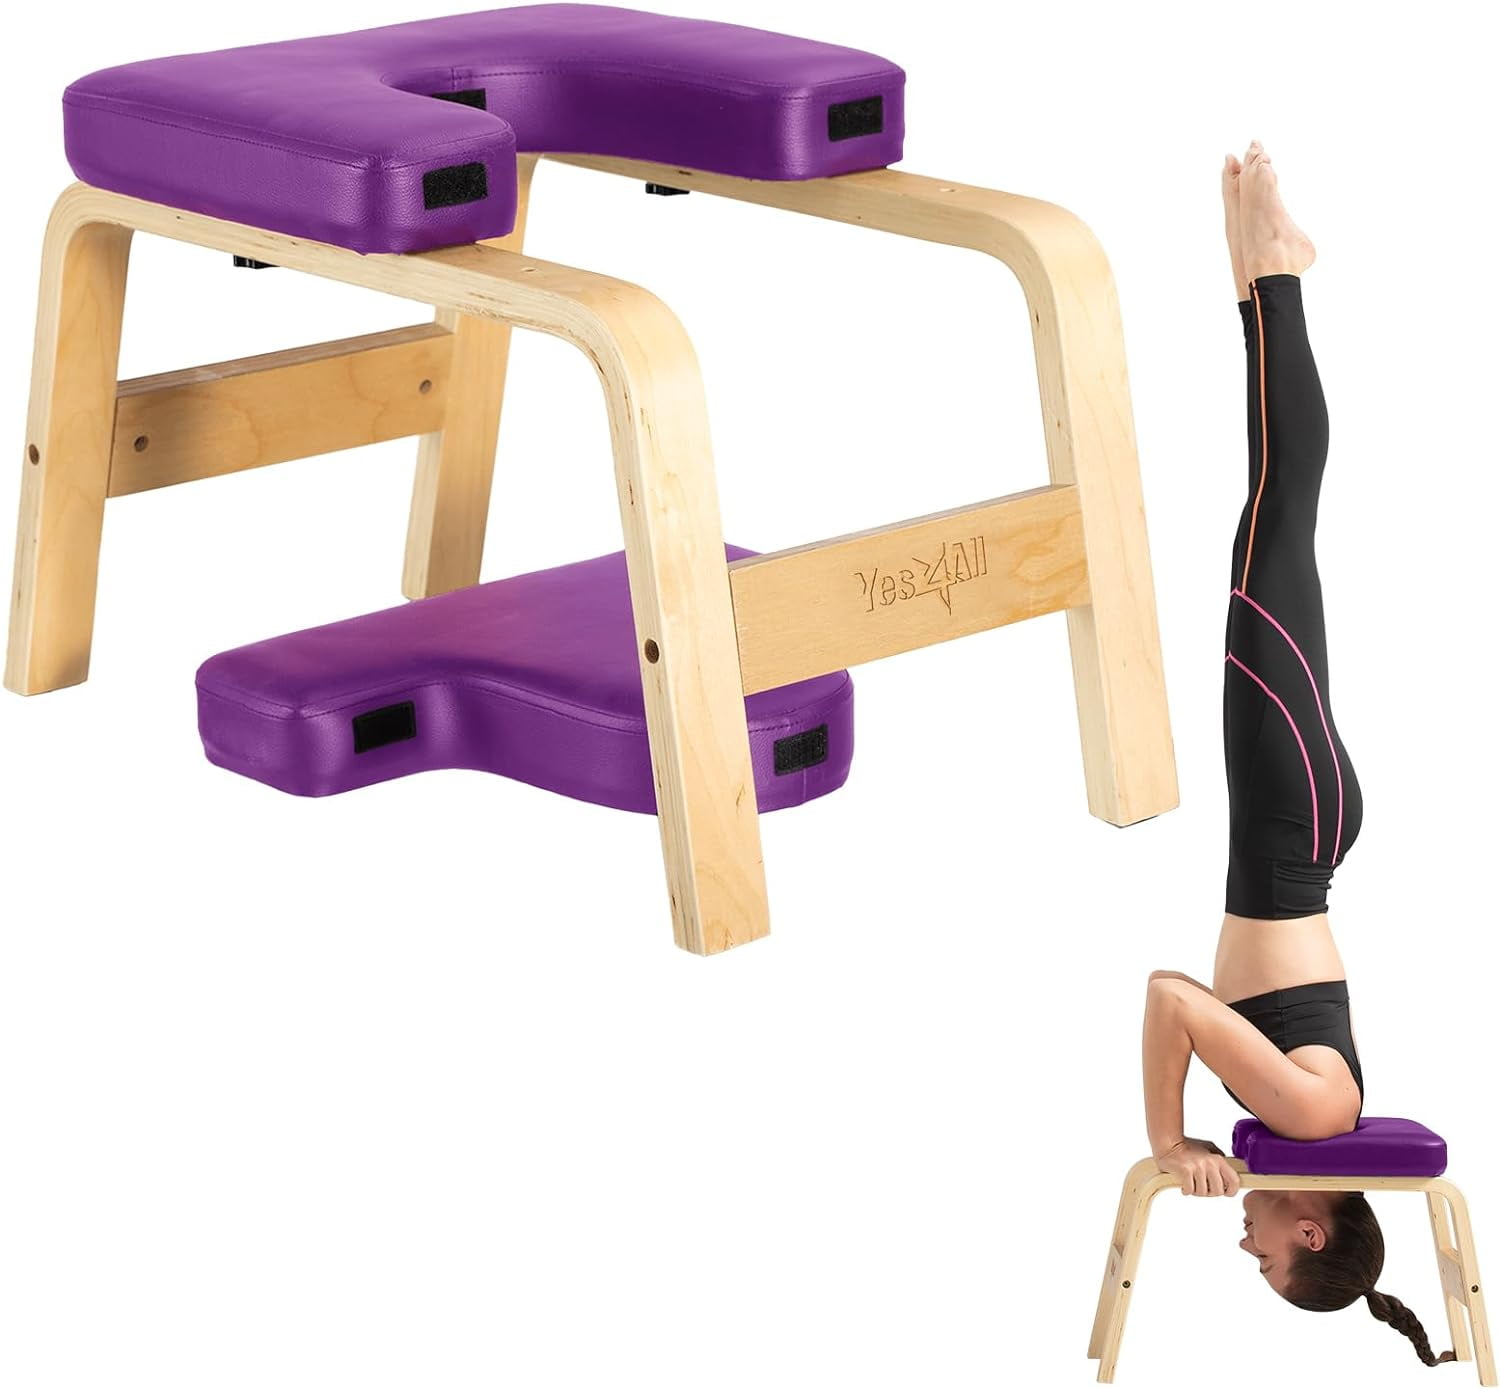 How Does a Yoga Headstand Bench Enhance Your Practice?